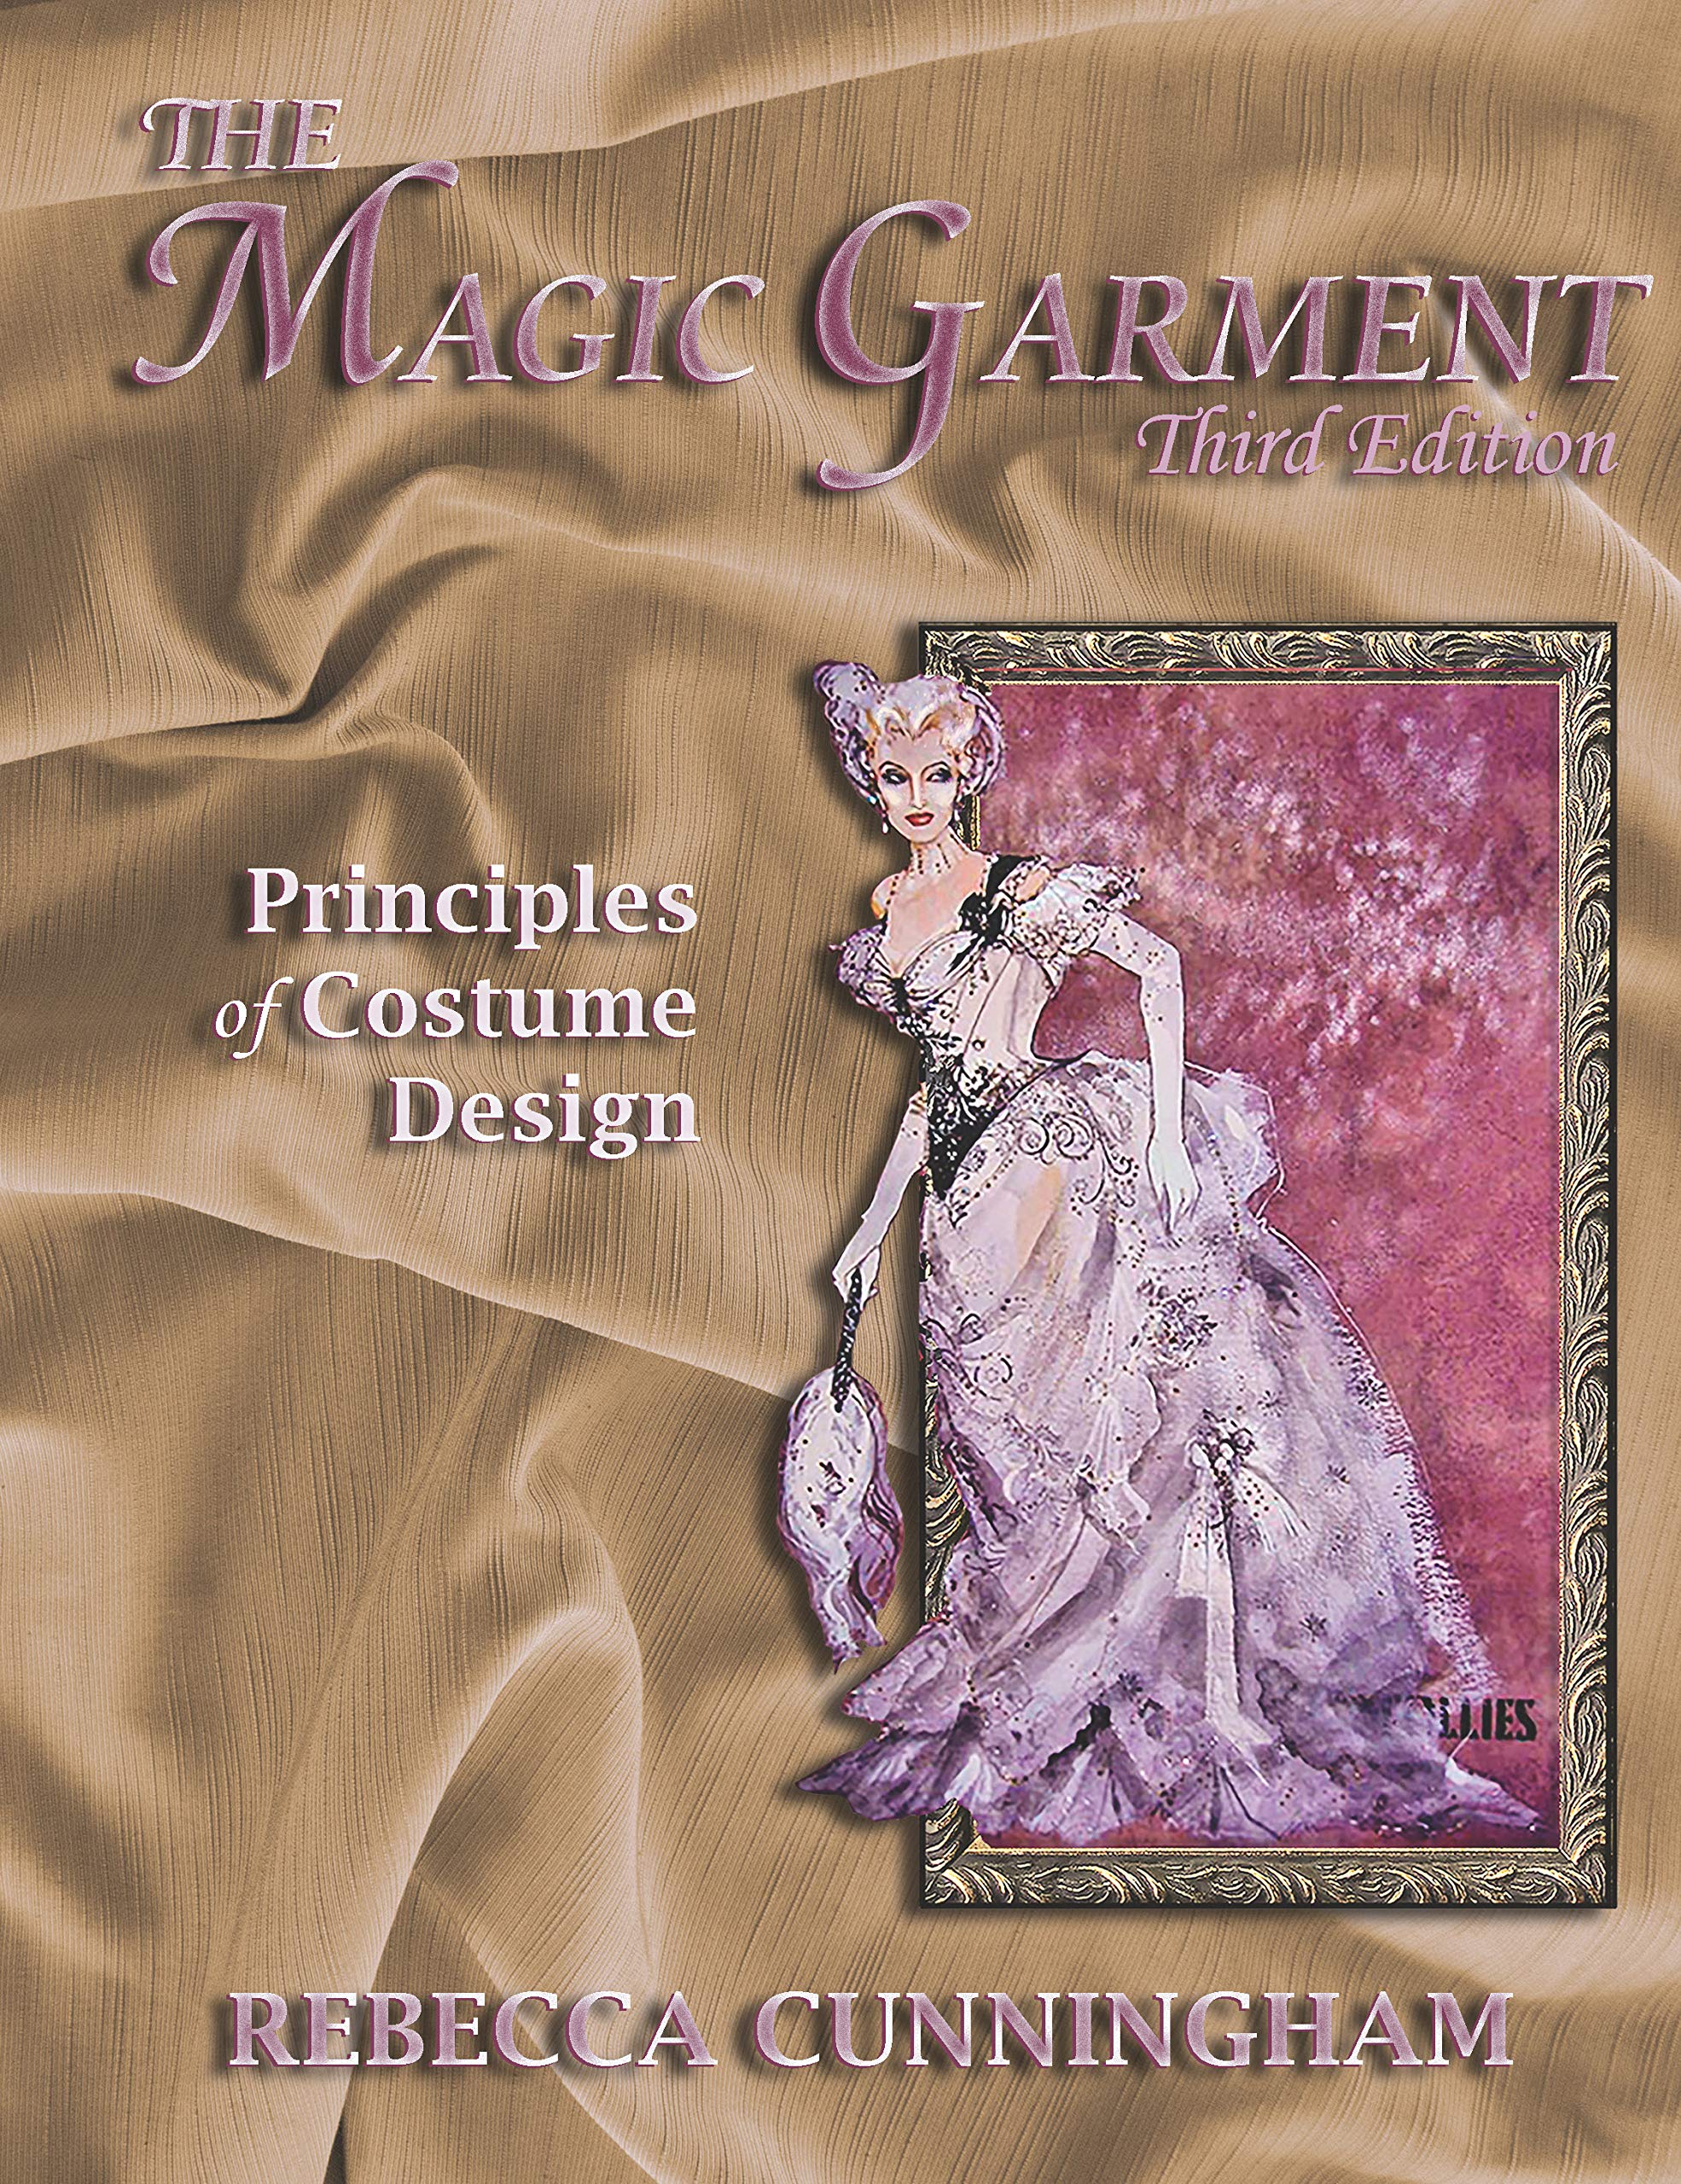 Magic garment book cover with a tan fabric background and a 1800s woman in a purple gown